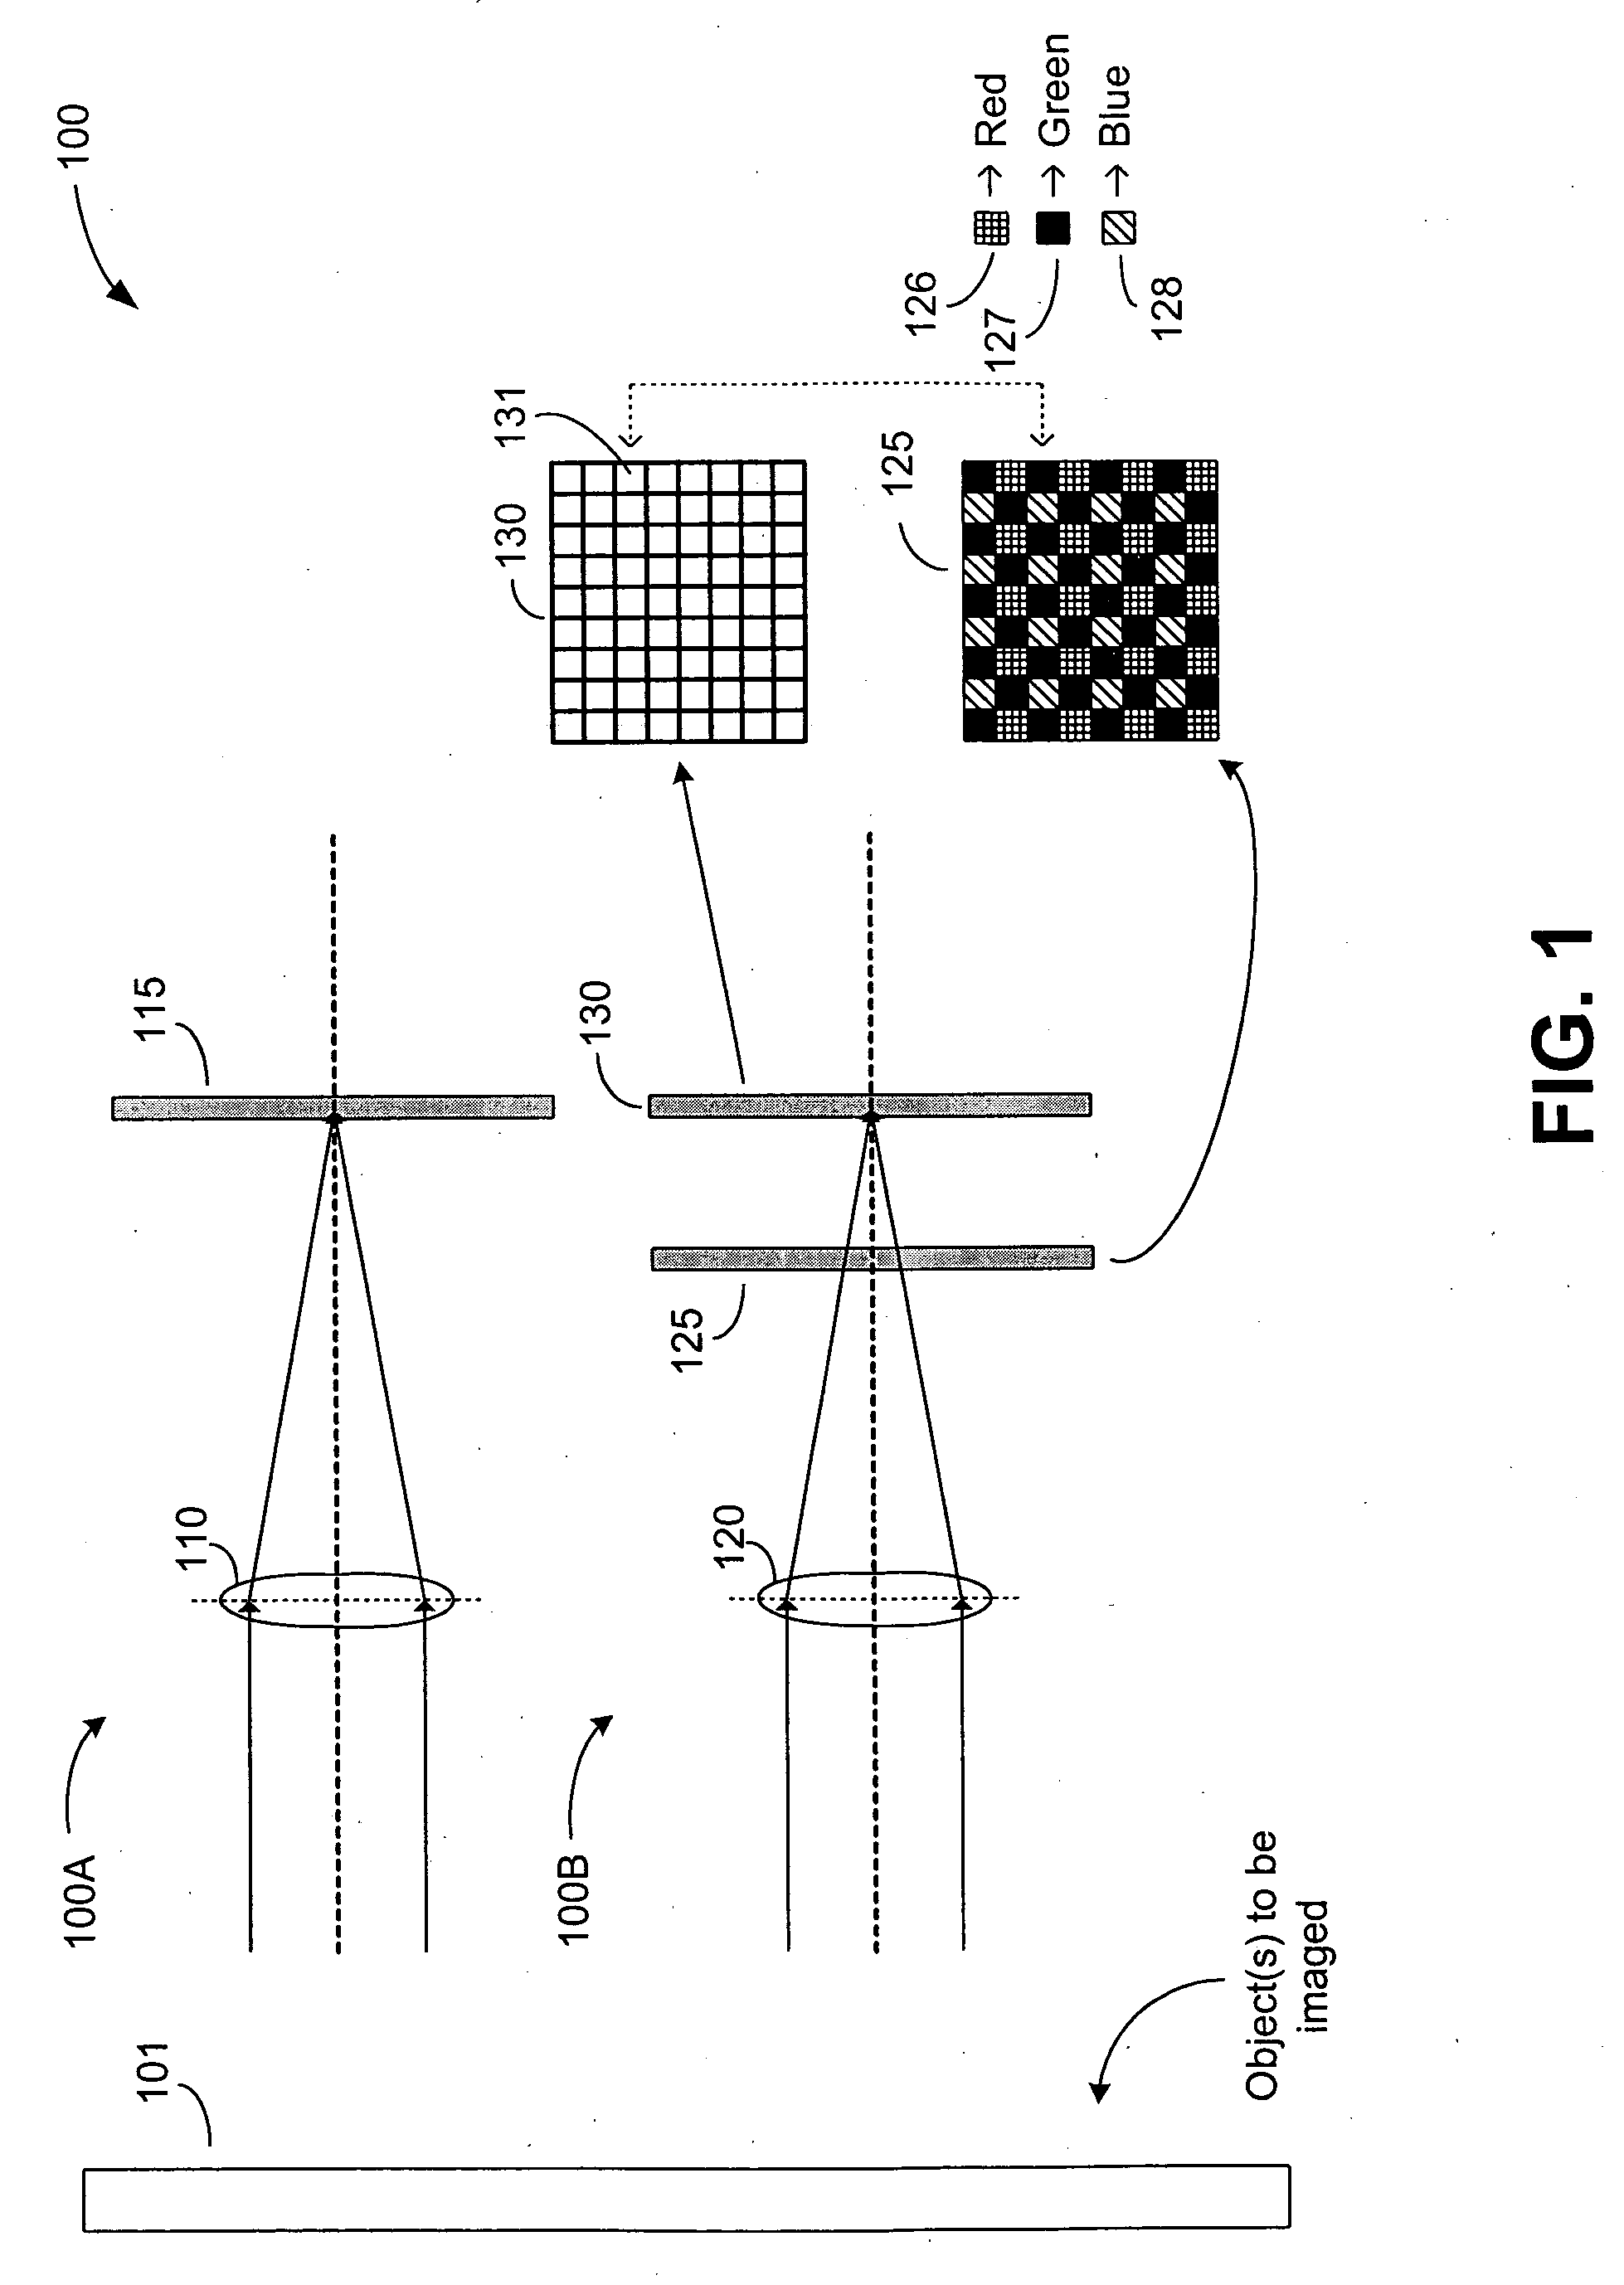 Multi-lens imaging systems and methods